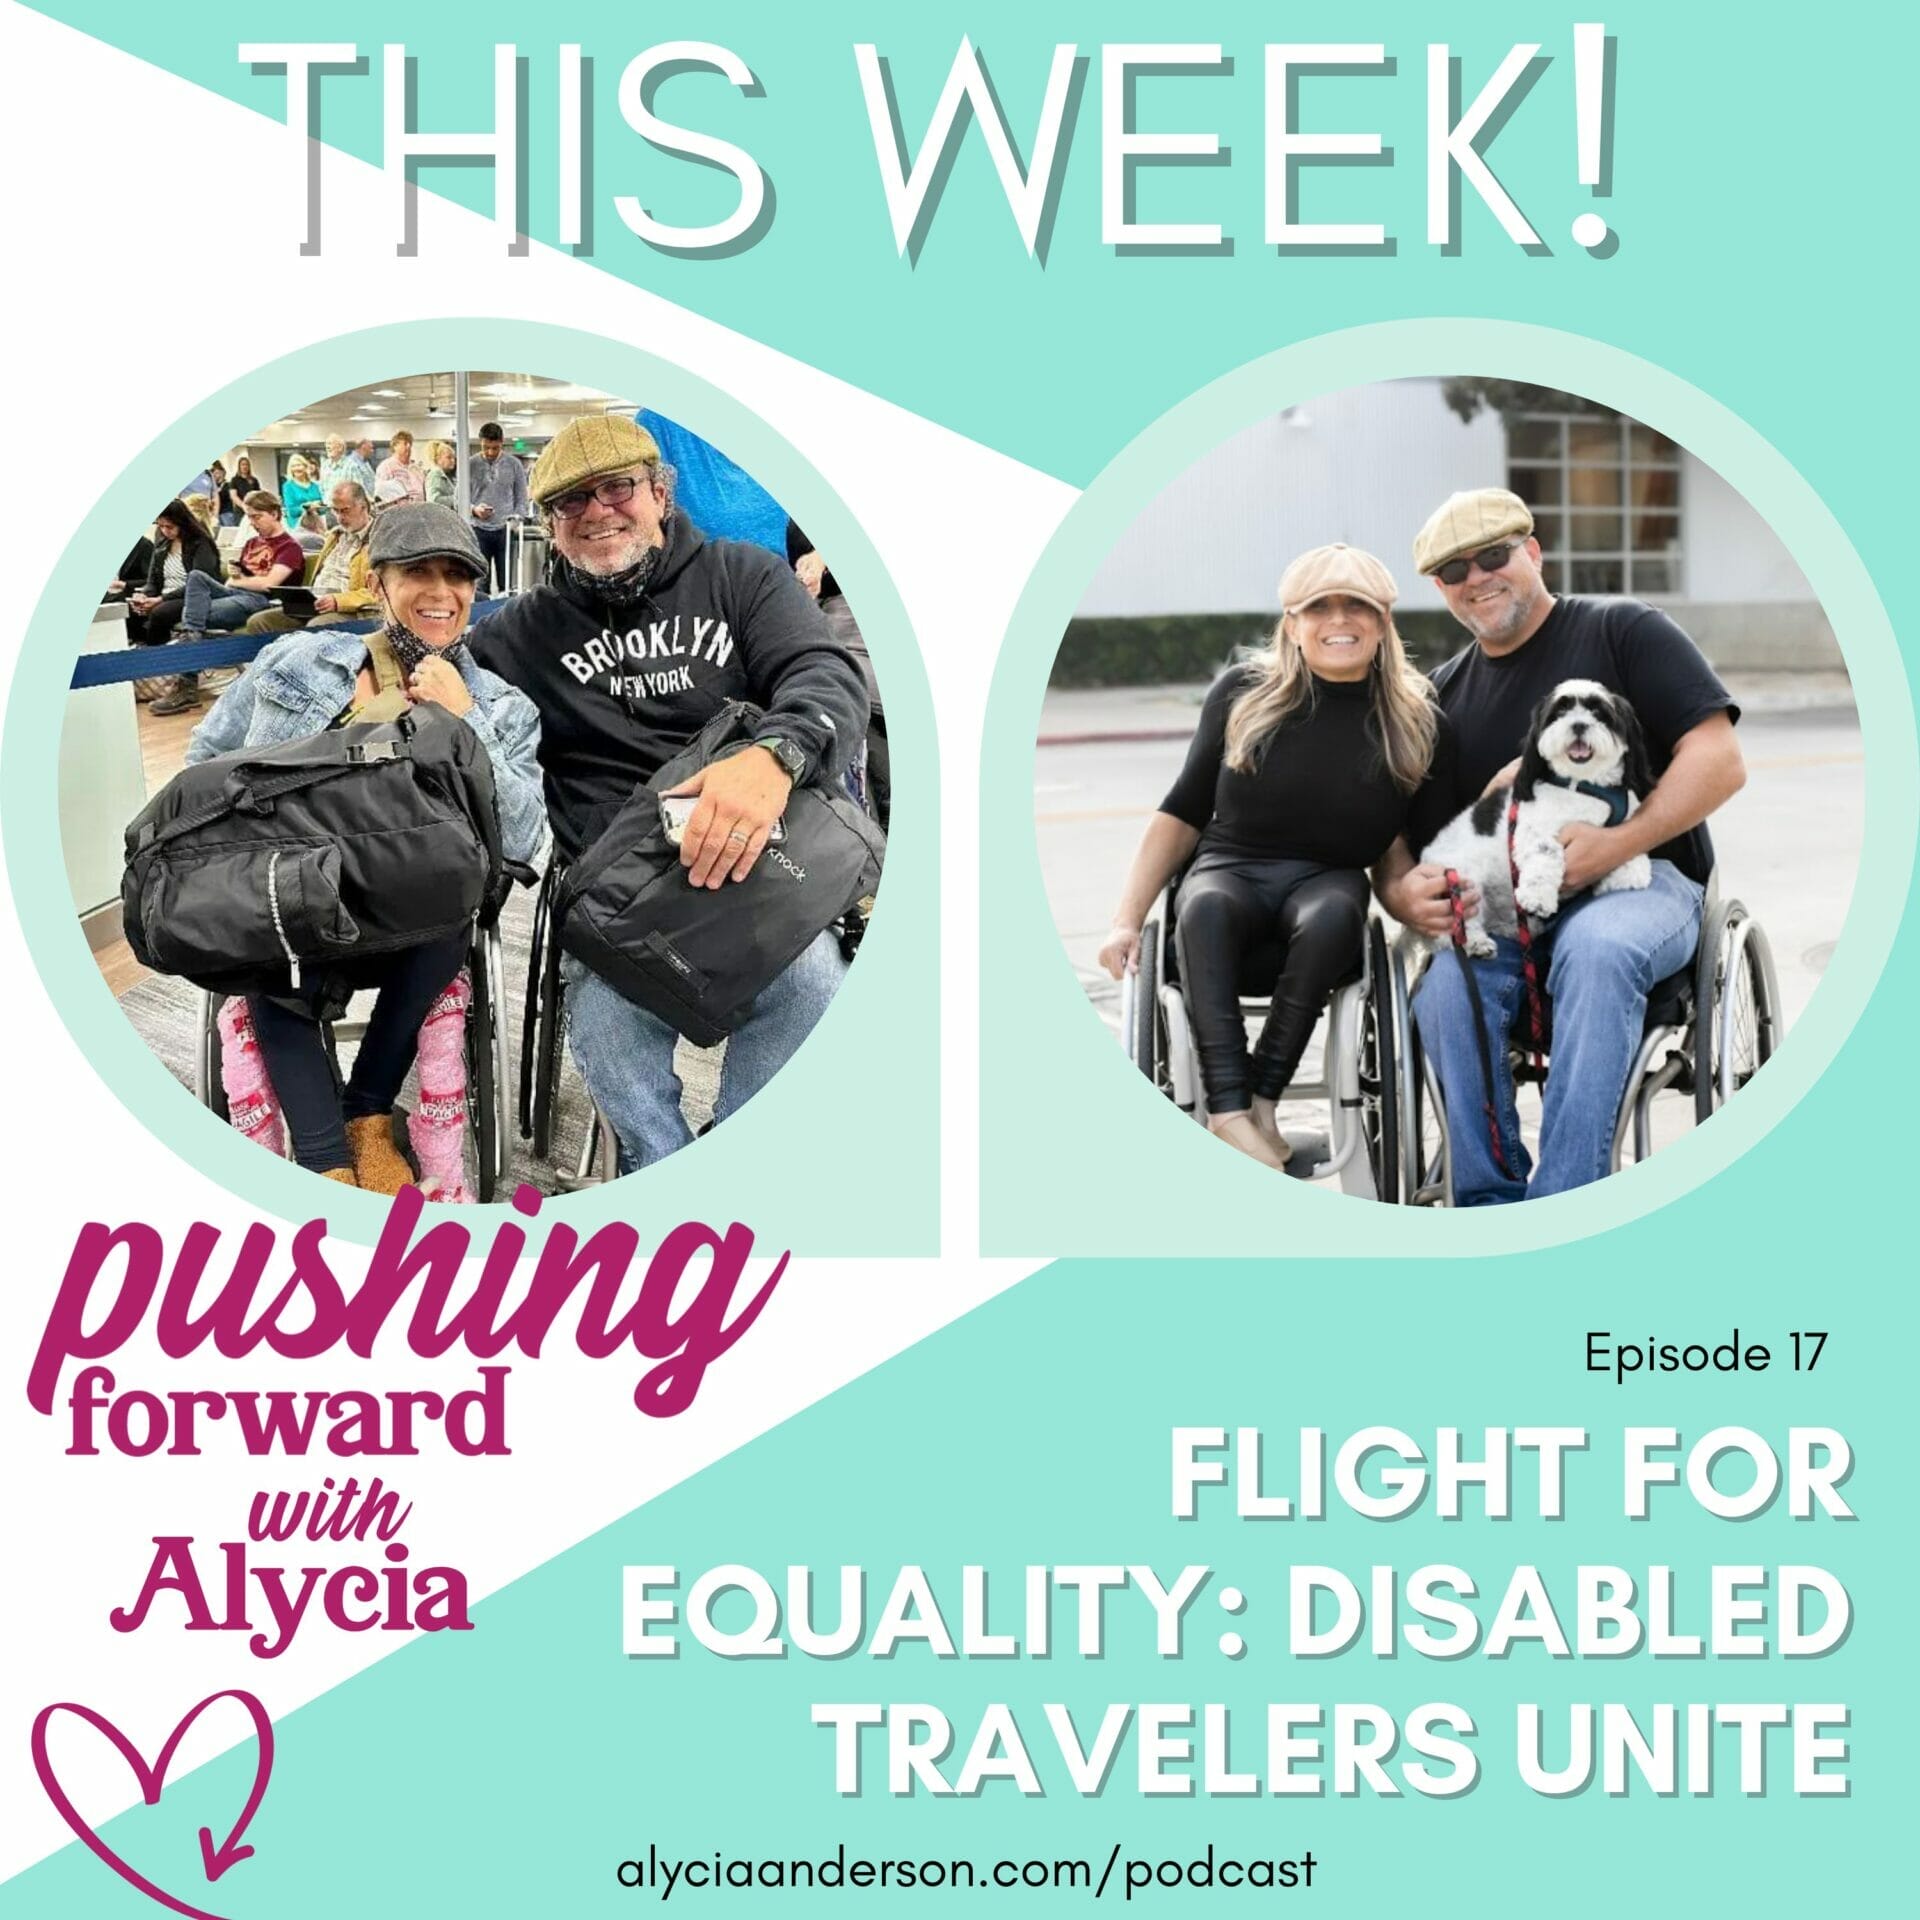 flight for equality disabled travelers unite this weeks episode seventeen of pushing forward with alycia